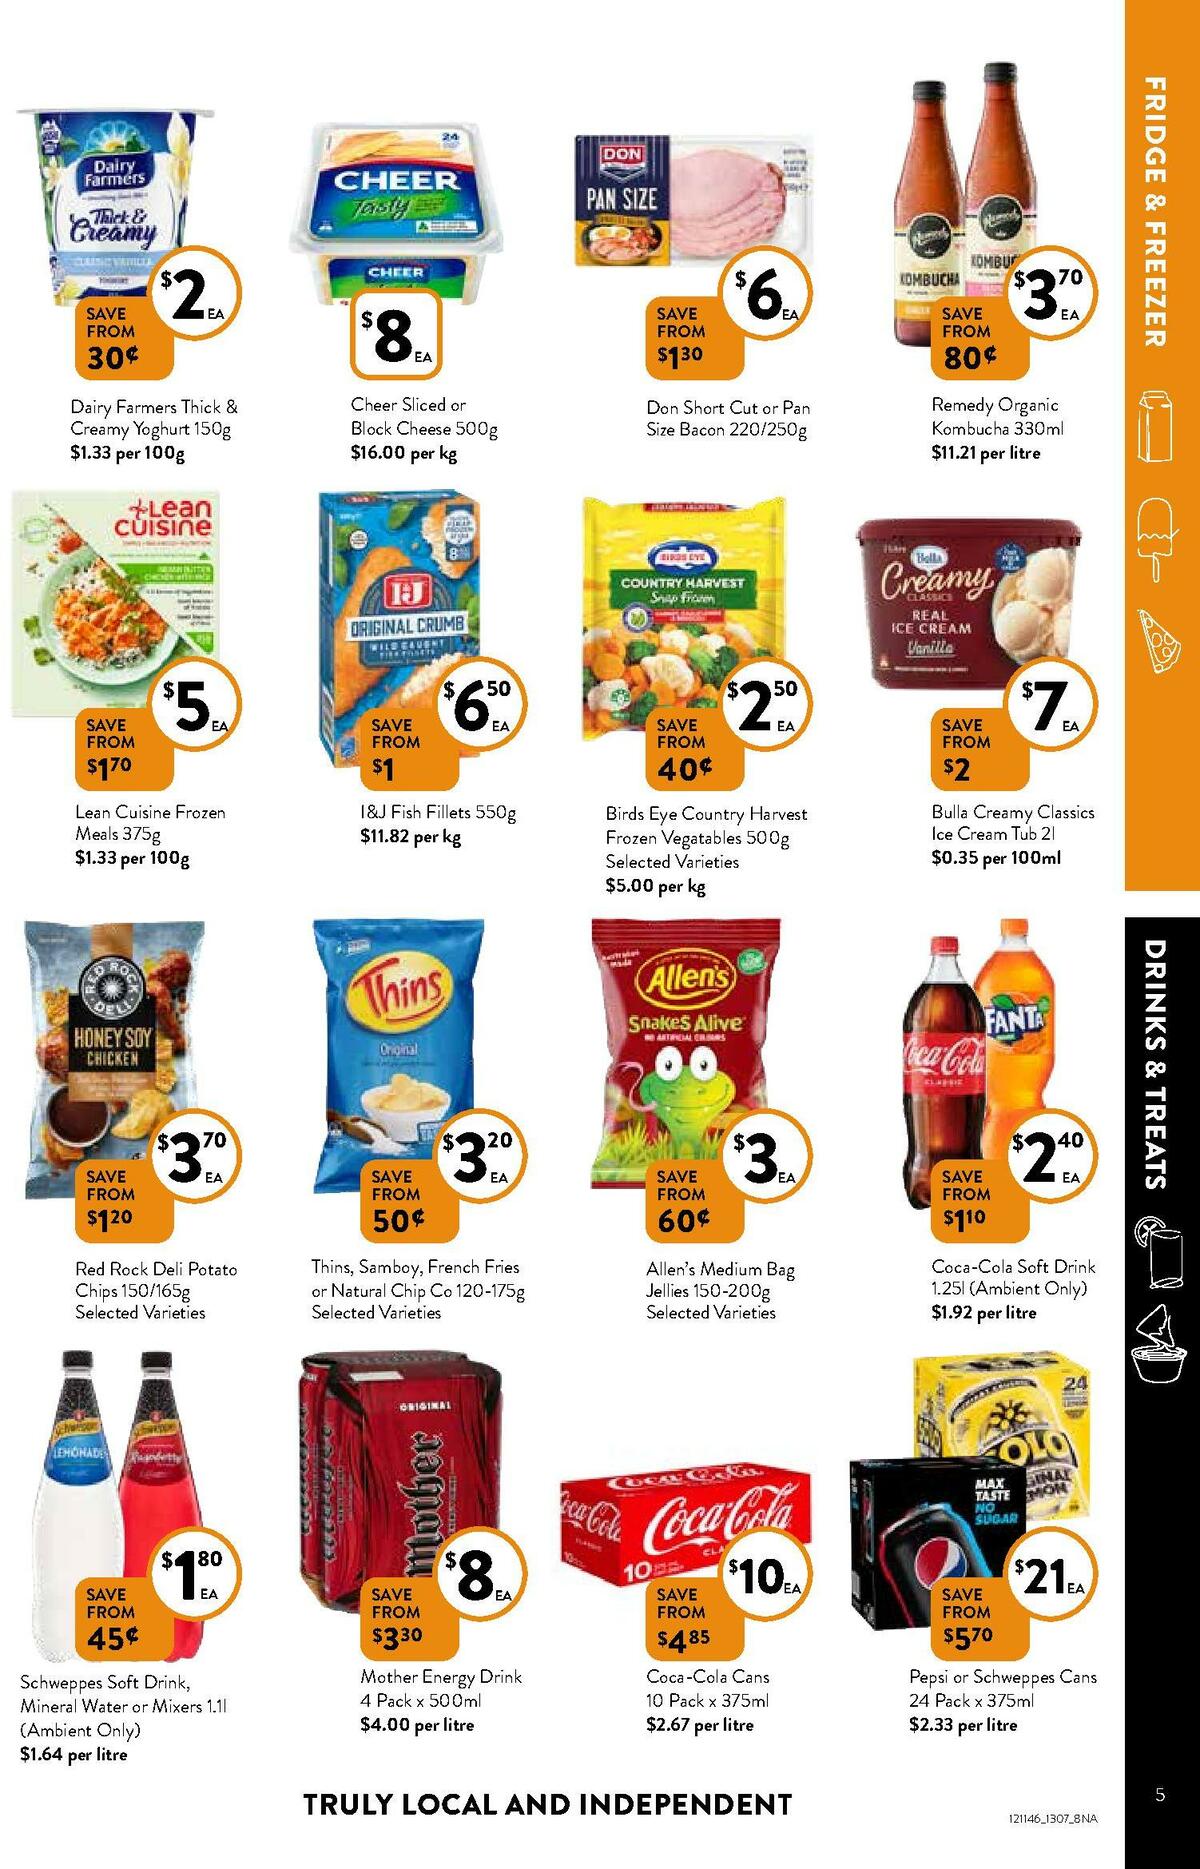 FoodWorks Catalogues from 13 July